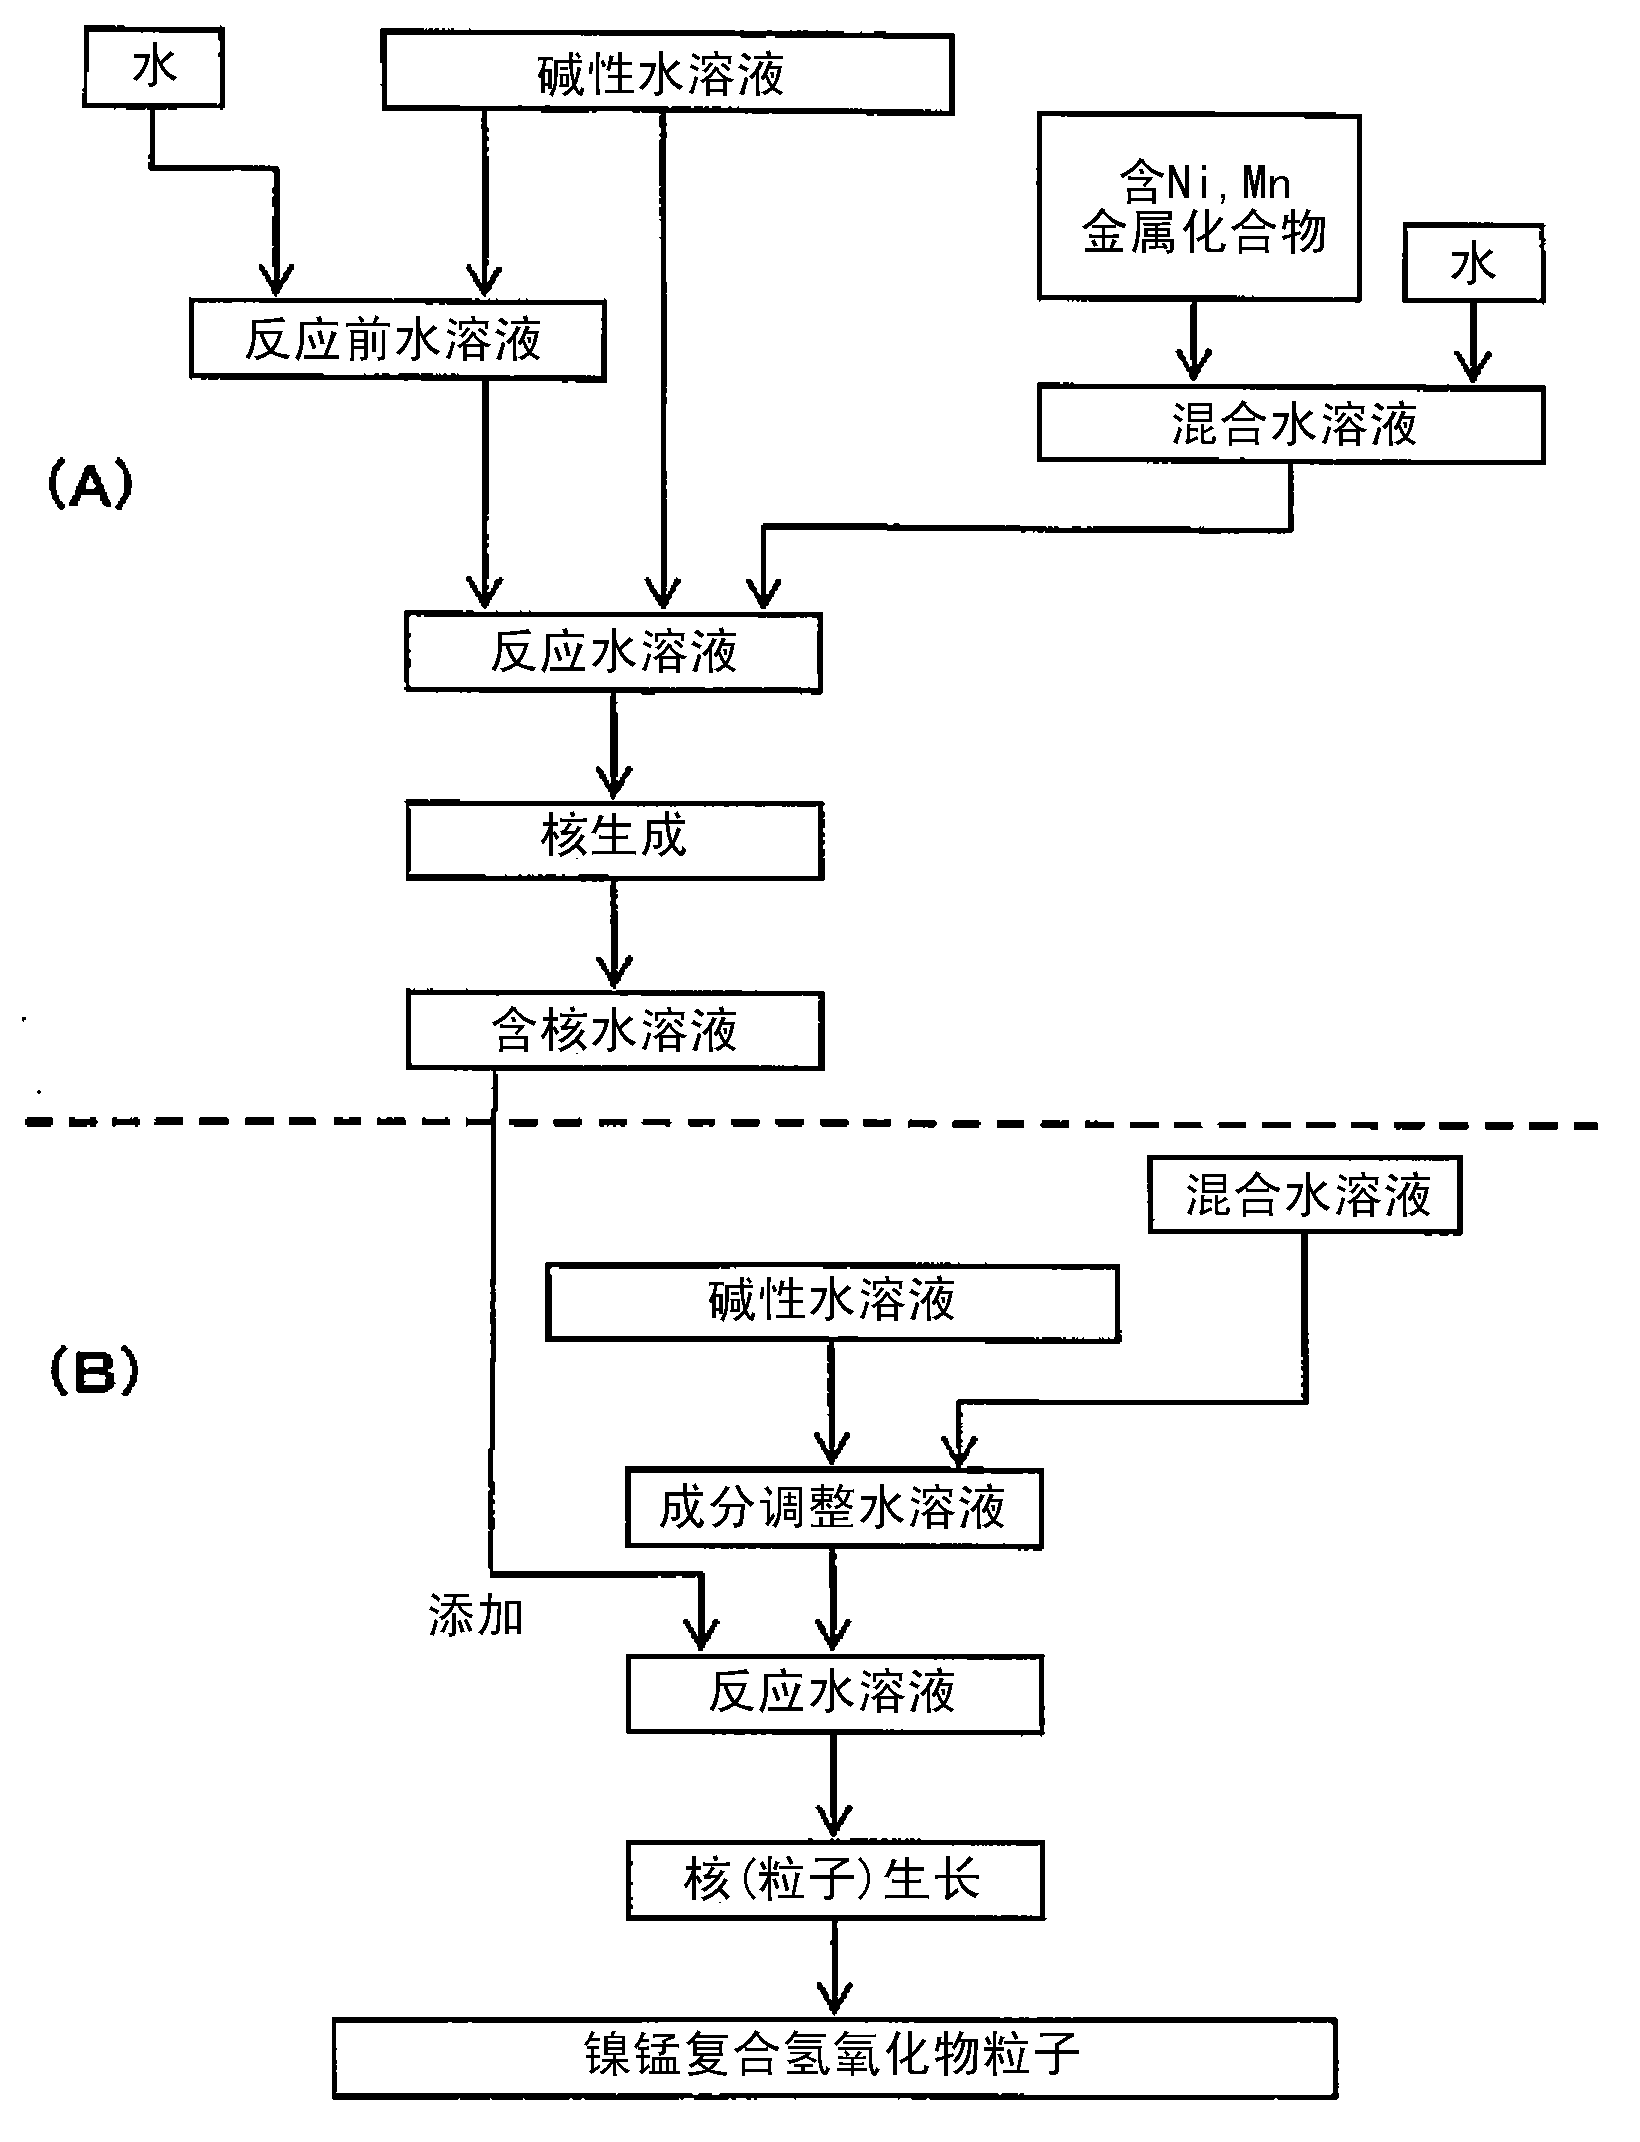 Nickel-manganese composite hydroxide particles, method for producing same, positive electrode active material for nonaqueous electrolyte secondary batteries, method for producing said positive electrode active material, and nonaqueous electrolyte secondary battery